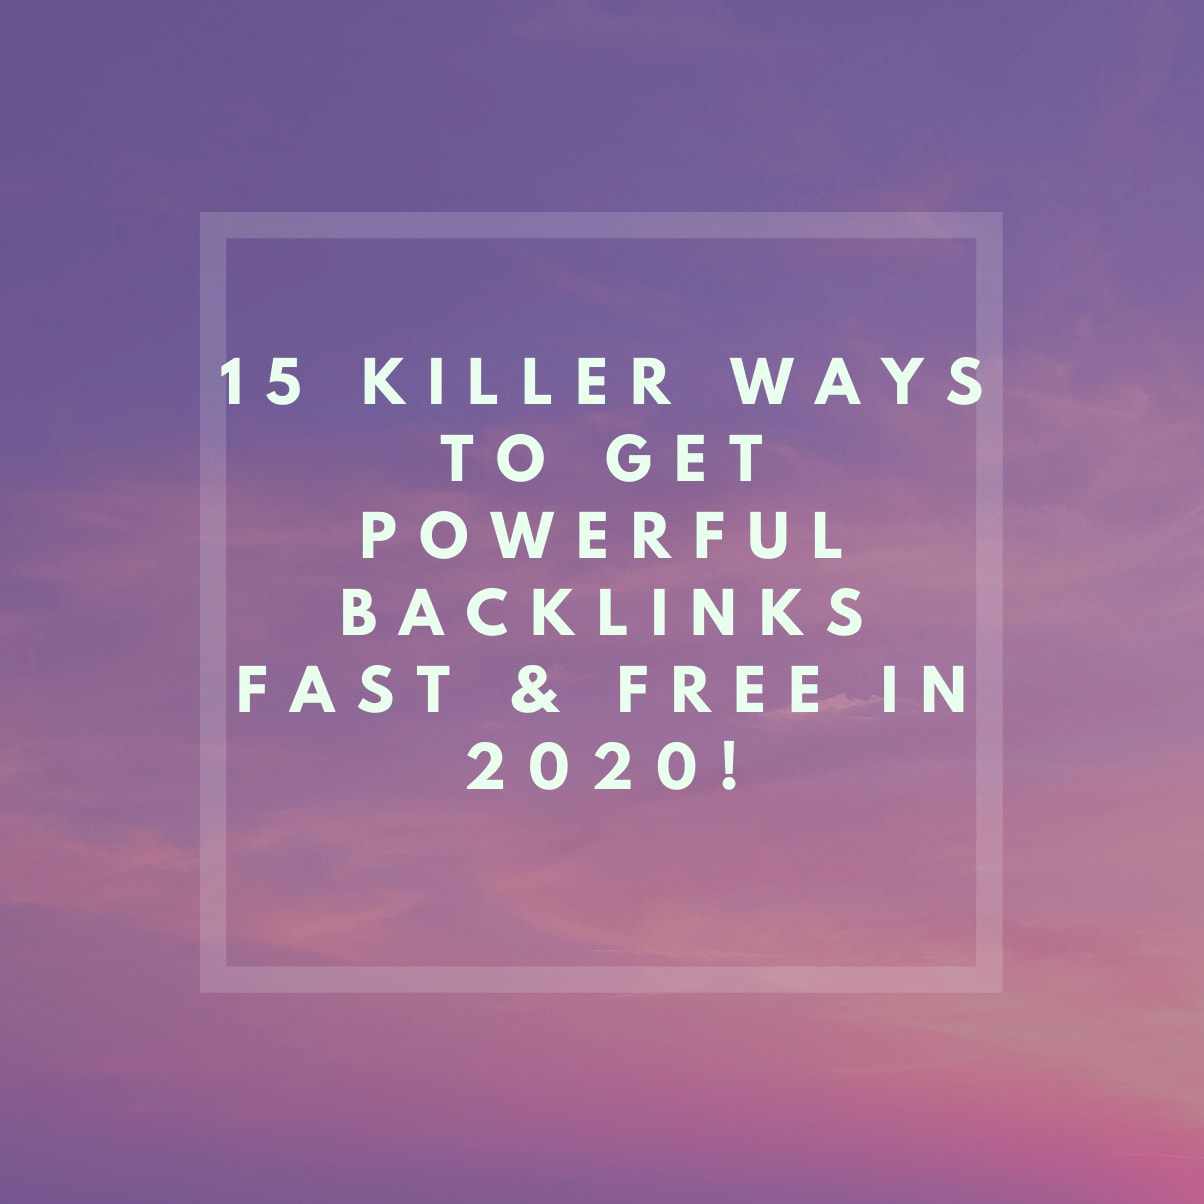 15 Killer Ways To Get Powerful Backlinks Fast & Free In 2020!